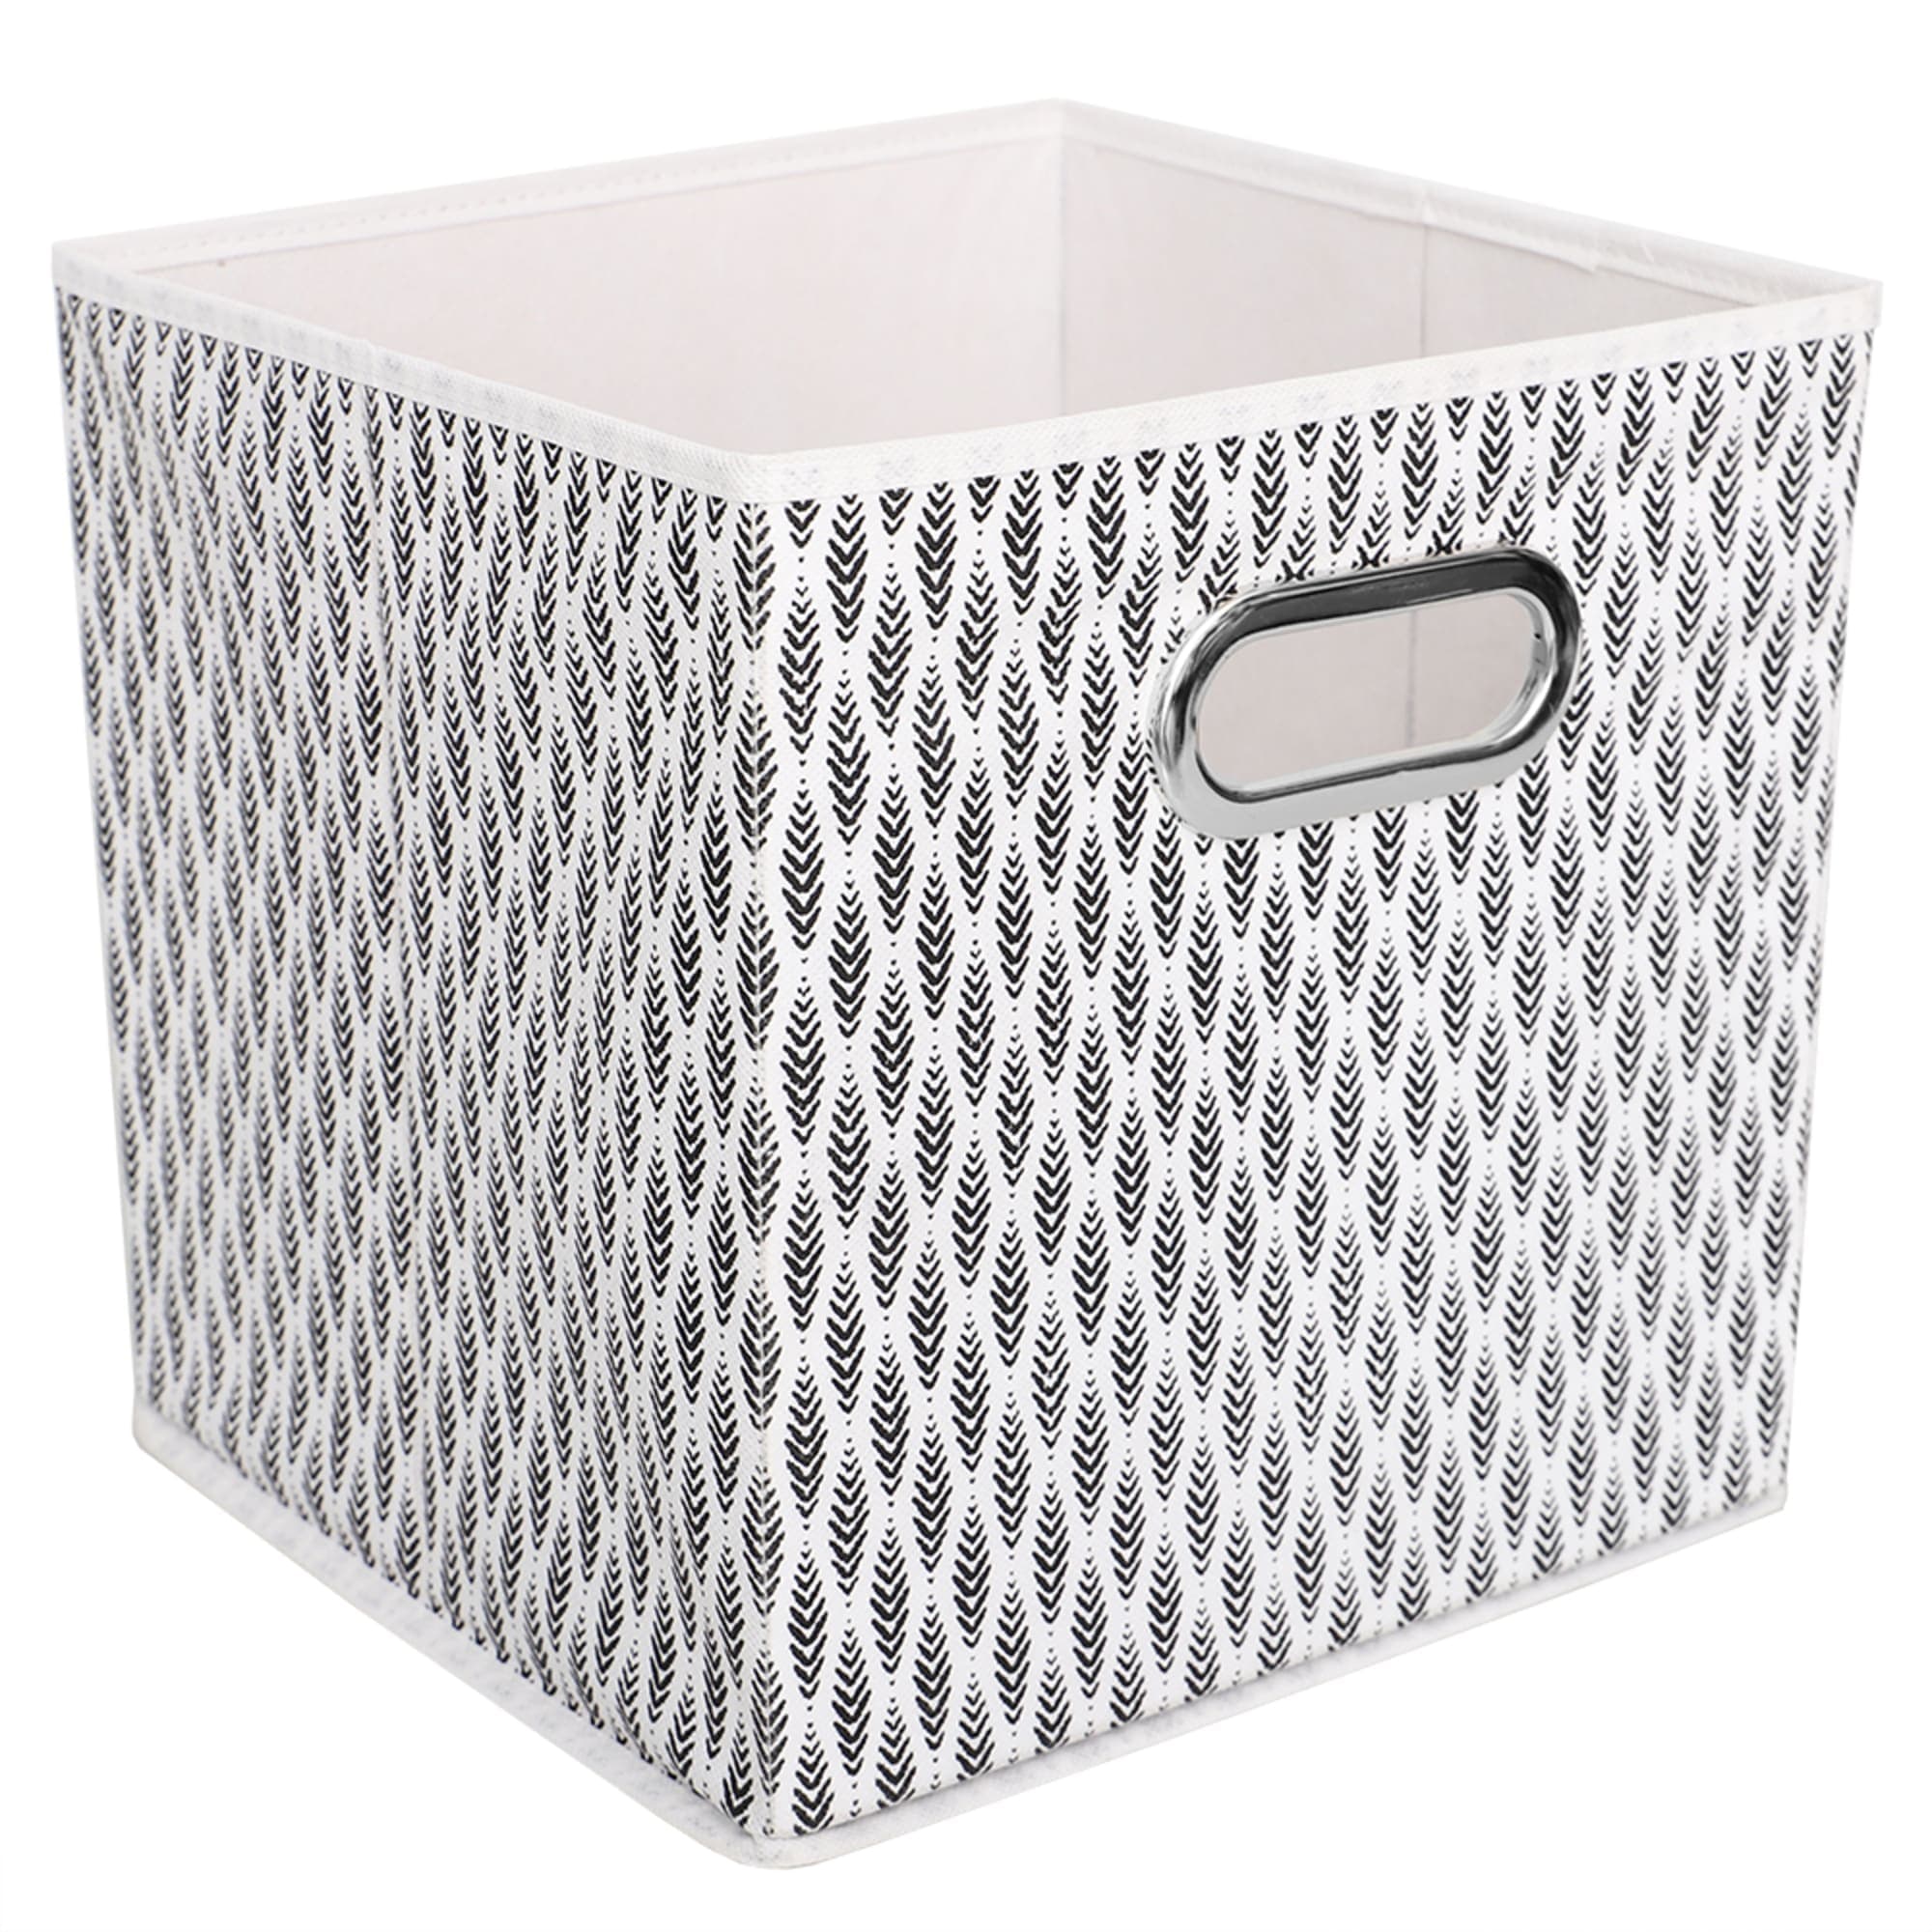 Home Basics Fern Collapsible Non-Woven Storage Bin with Grommet